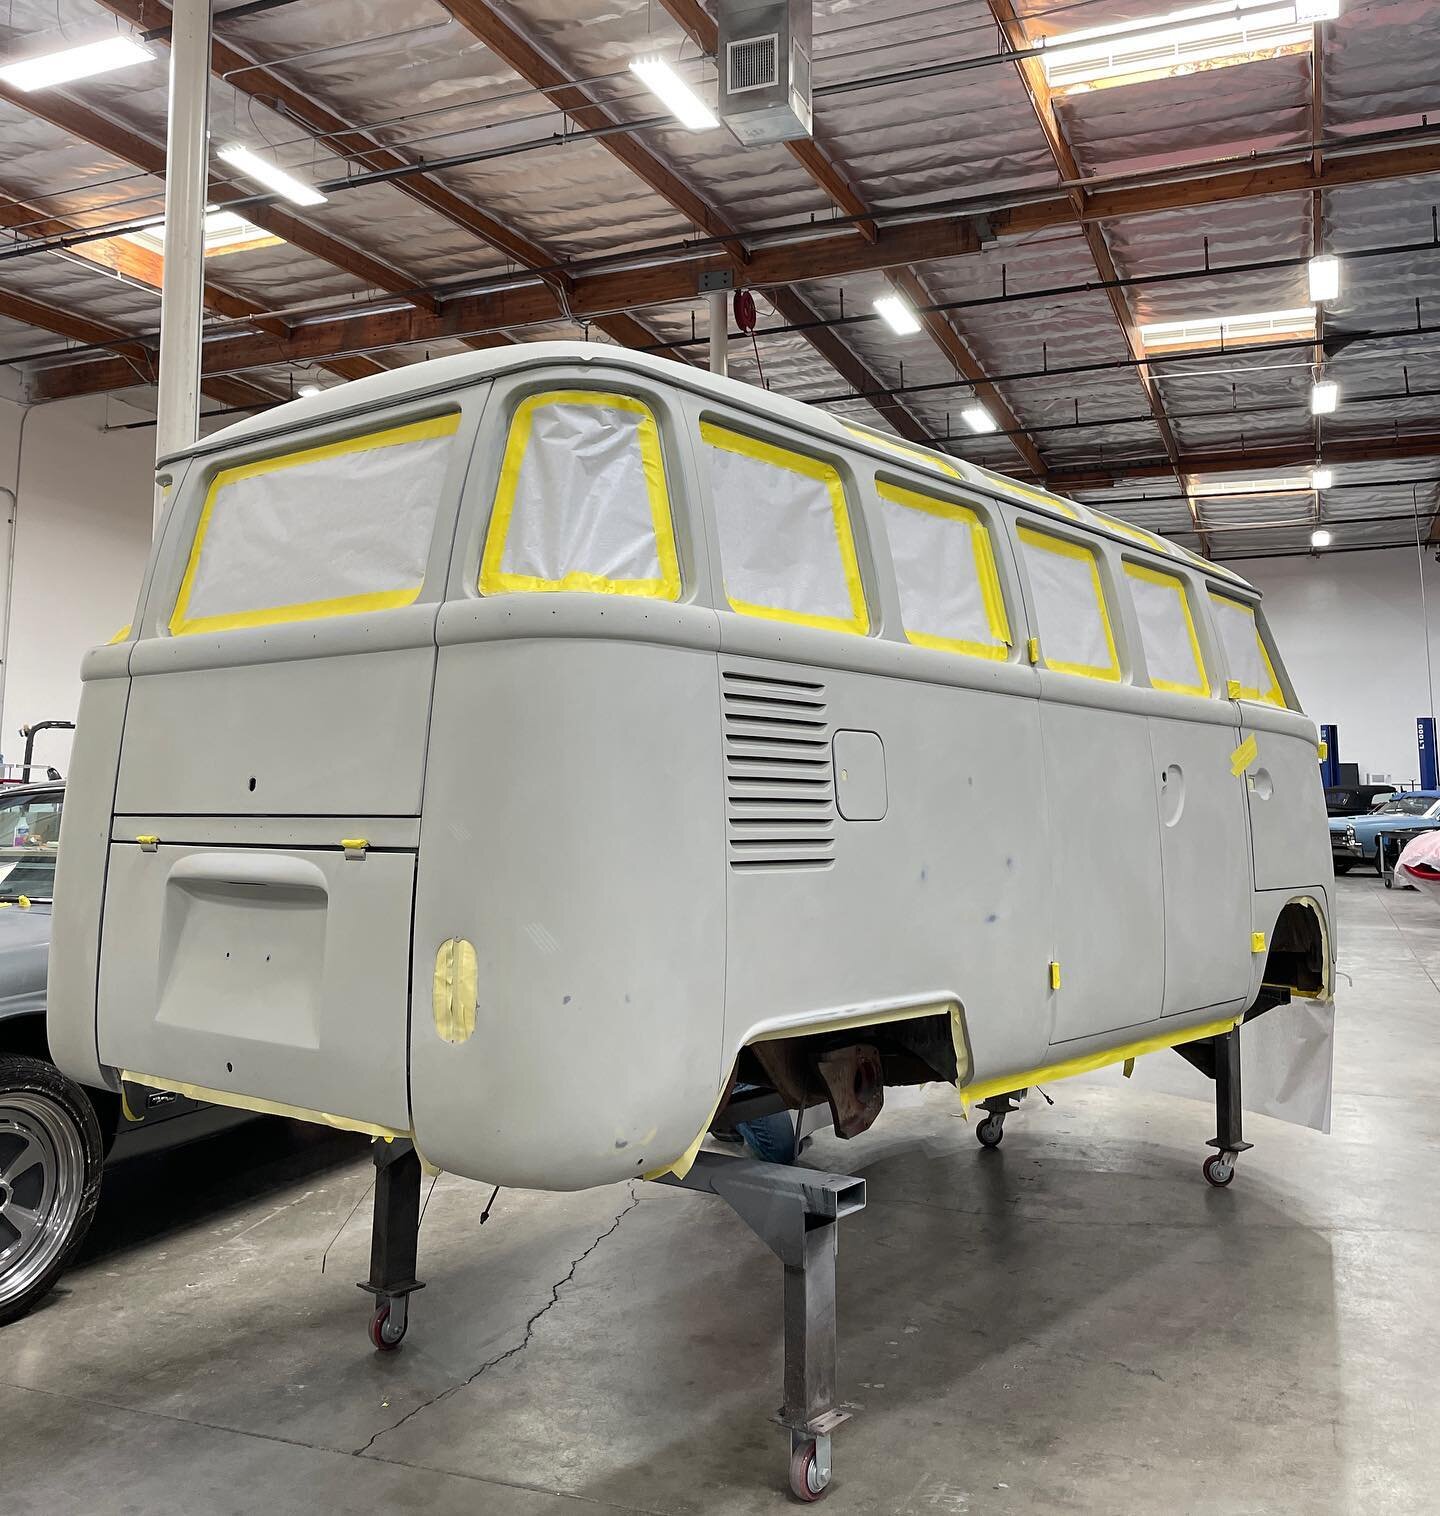 The bus is ready for primer. Paint coming soon!

#ColorsandDesign #vw #vwbus #vwaircooled